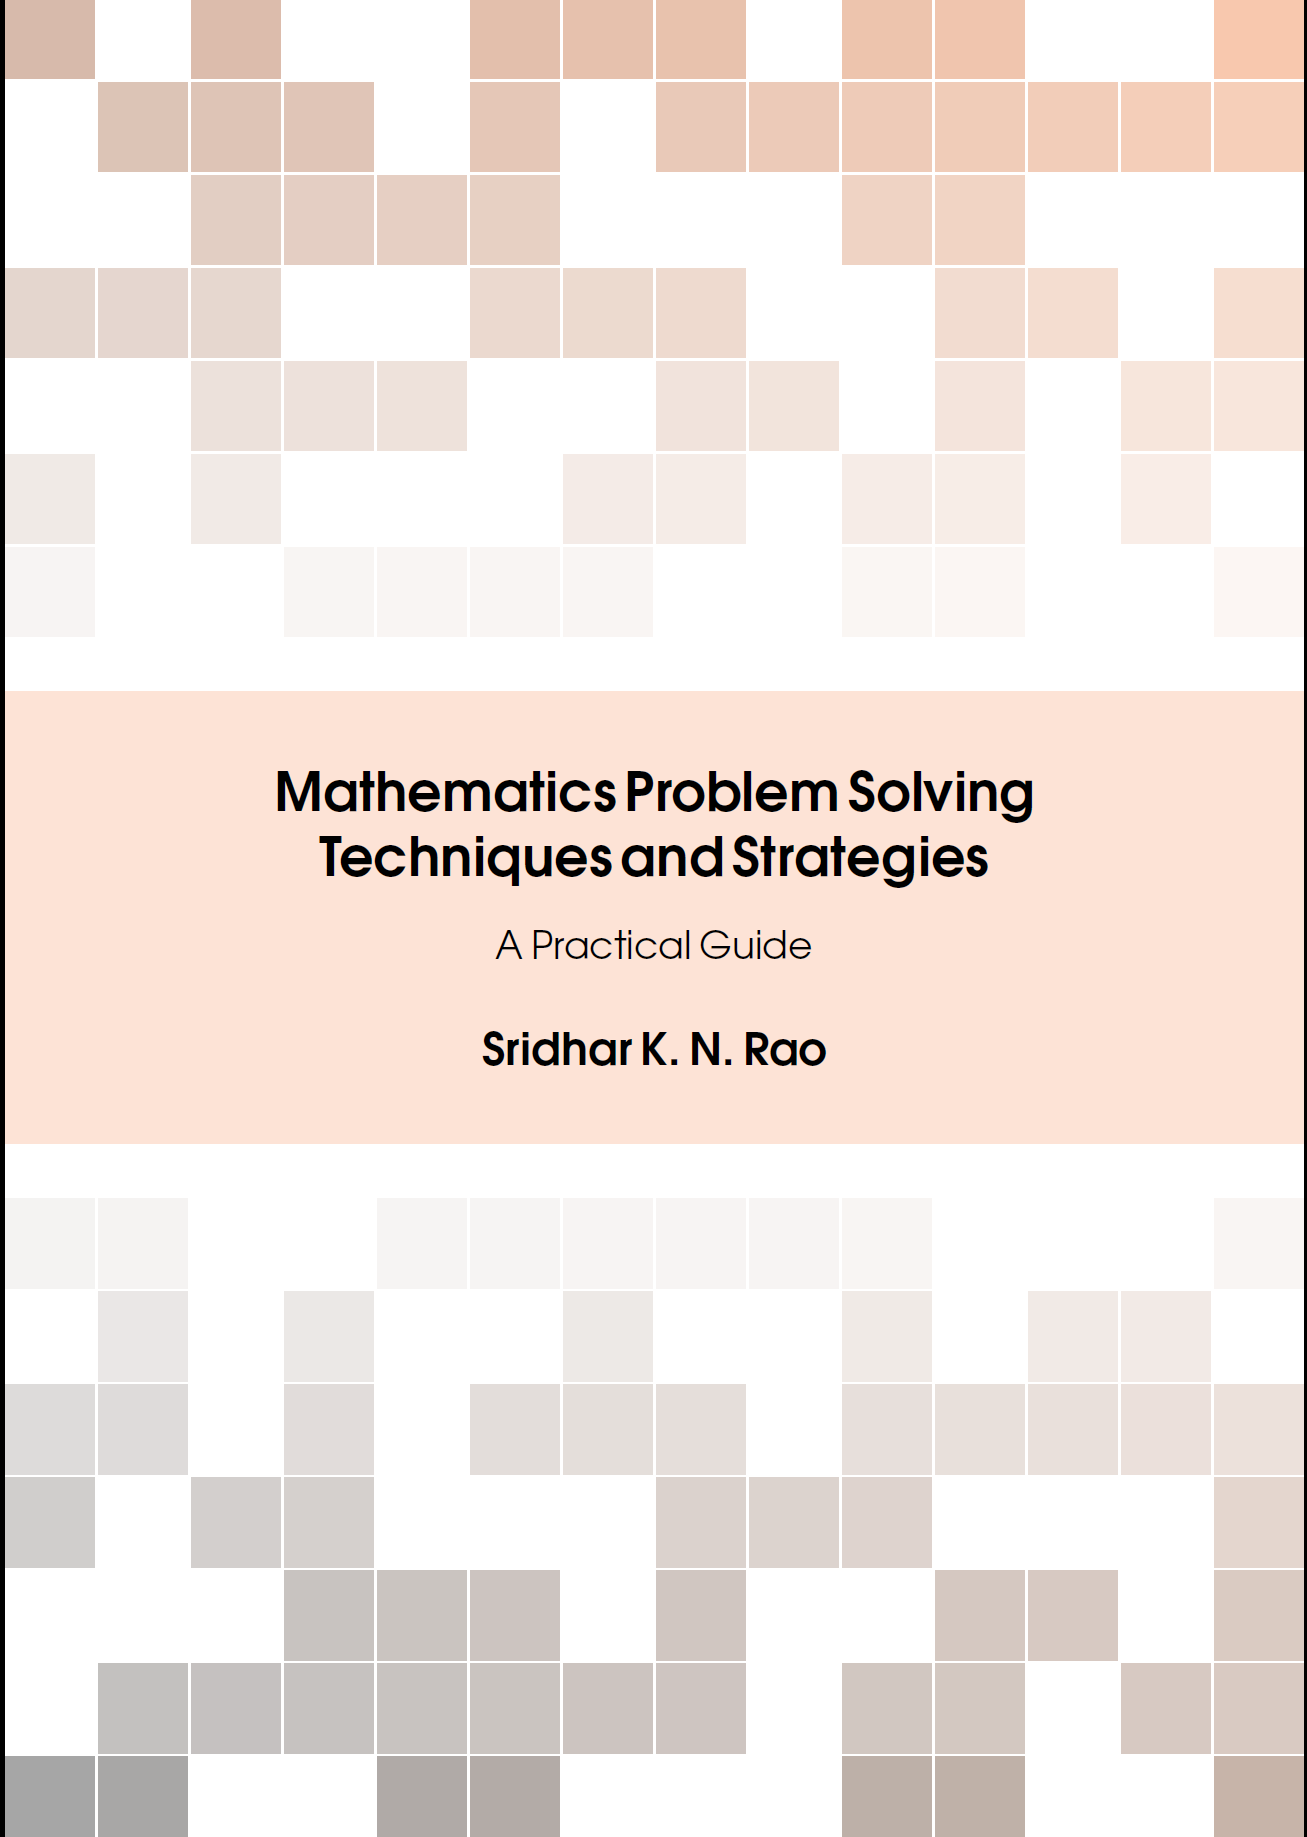 A Book of Mathematics Problem Solving Strategies and Techniques